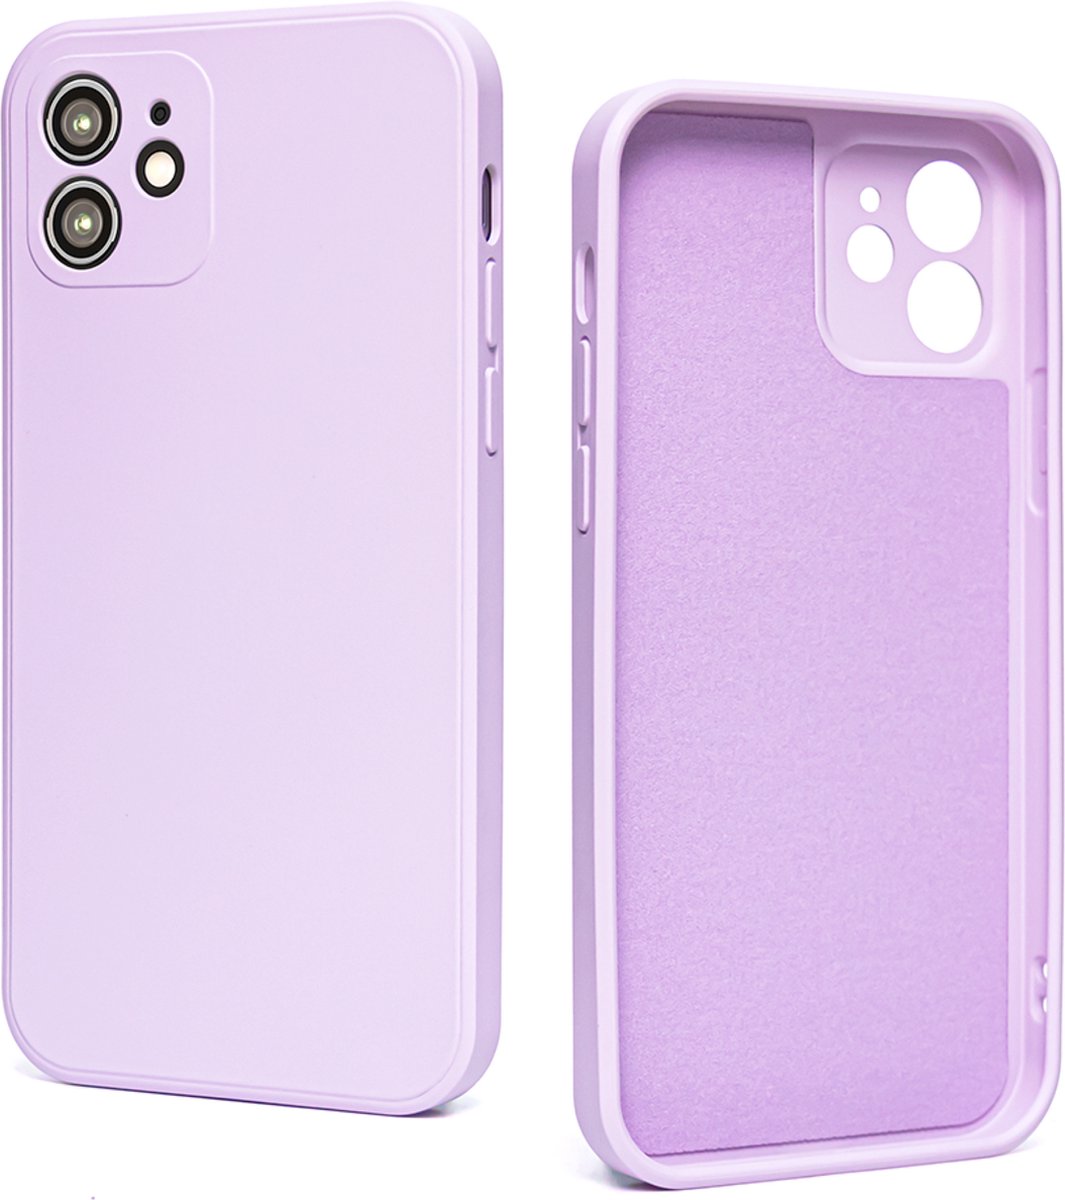 Iphone 13 case - Paars/Lila